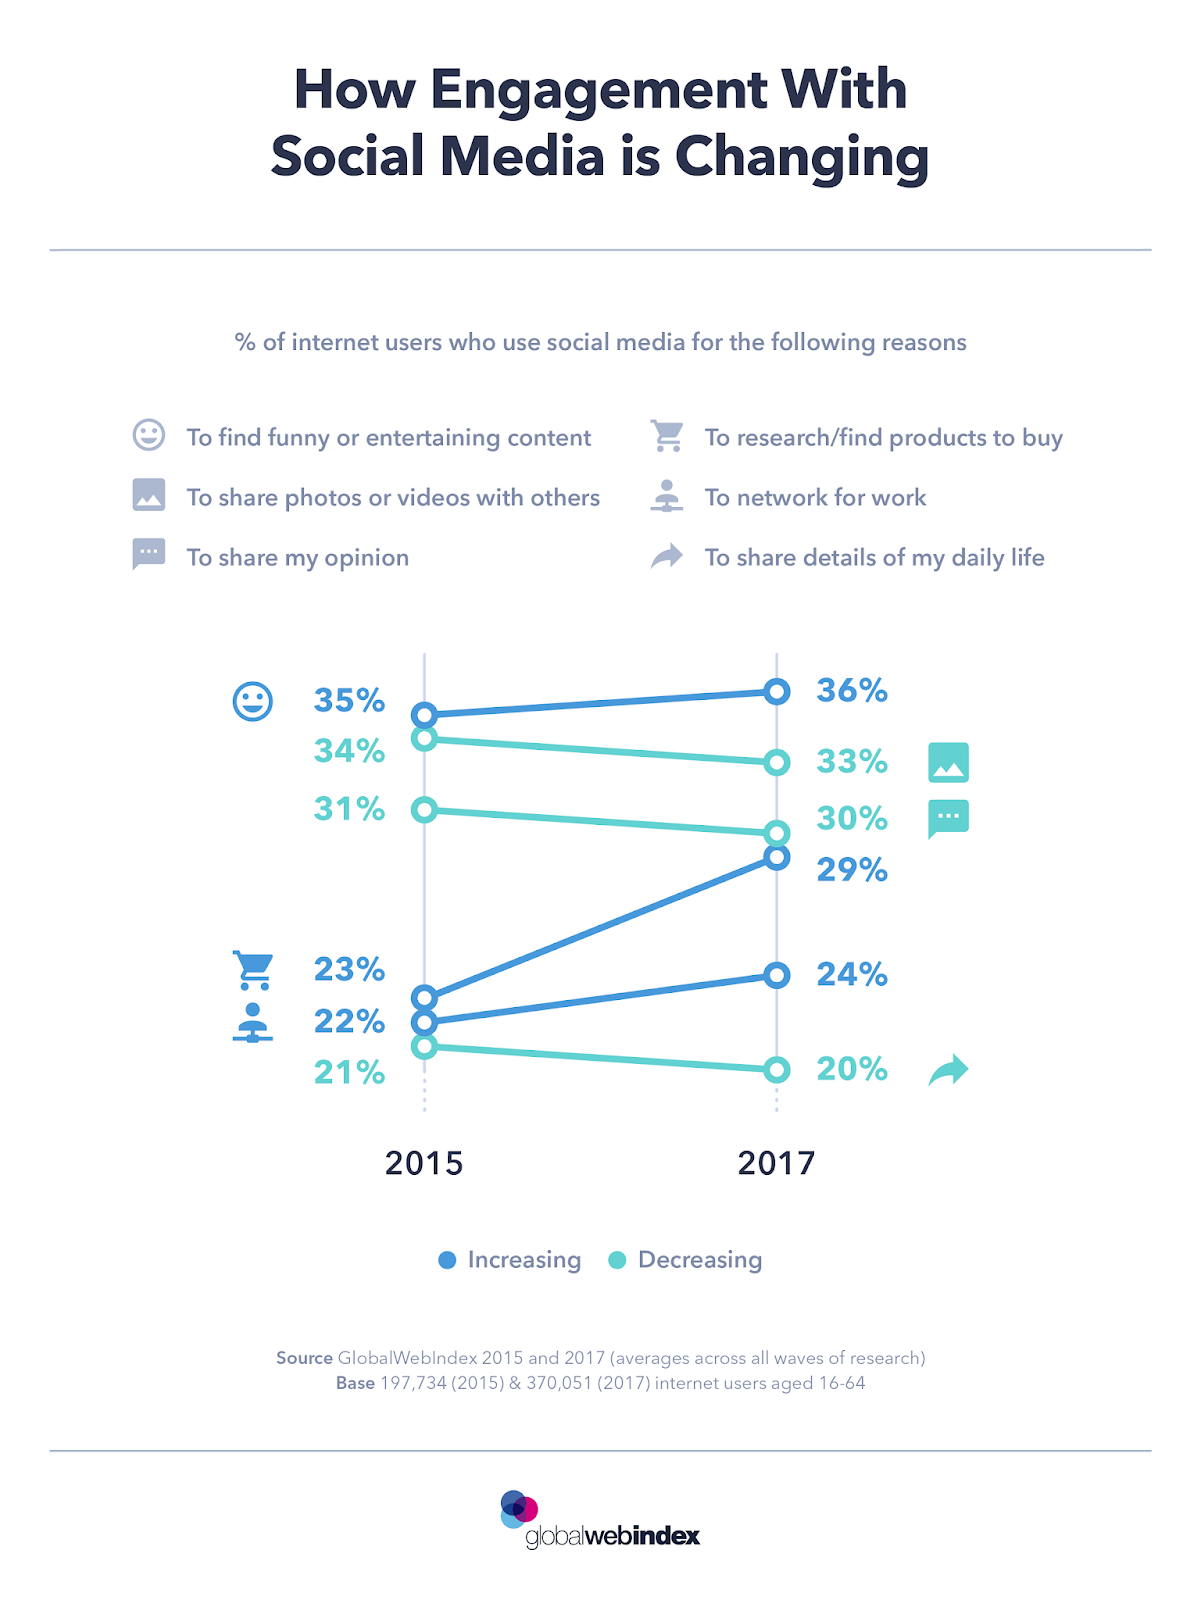 How Engagement With Social Media is Changing - #infographic